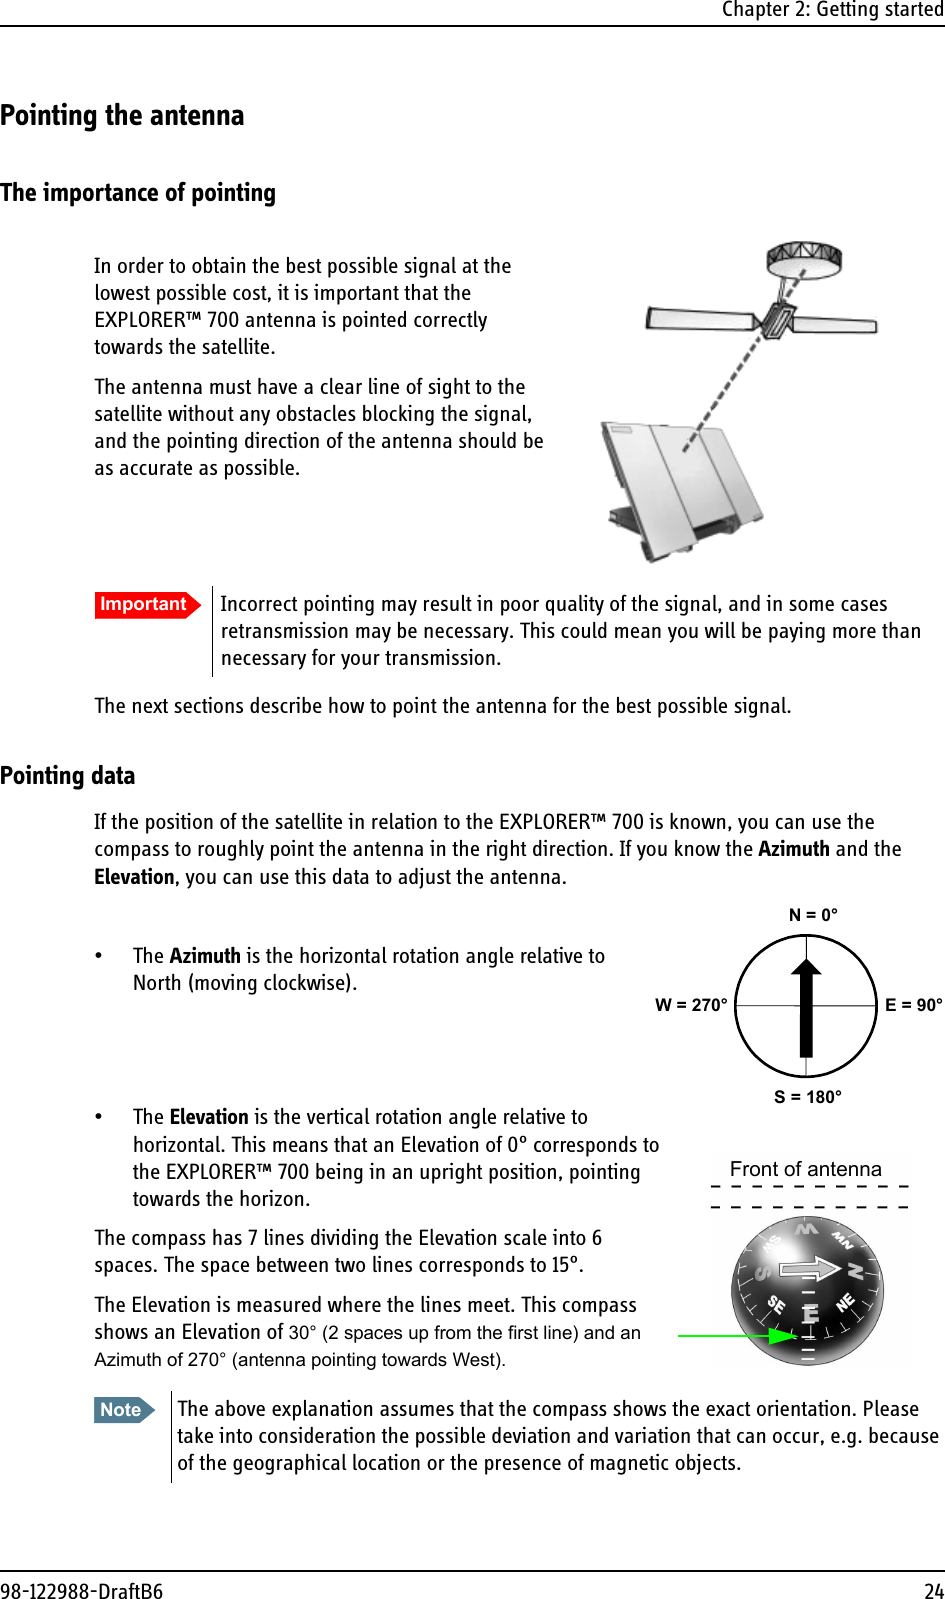 Chapter 2: Getting started98-122988-DraftB6 24Pointing the antennaThe importance of pointingIn order to obtain the best possible signal at the lowest possible cost, it is important that the EXPLORER™ 700 antenna is pointed correctly towards the satellite. The antenna must have a clear line of sight to the satellite without any obstacles blocking the signal, and the pointing direction of the antenna should be as accurate as possible.The next sections describe how to point the antenna for the best possible signal.Pointing dataIf the position of the satellite in relation to the EXPLORER™ 700 is known, you can use the compass to roughly point the antenna in the right direction. If you know the Azimuth and the Elevation, you can use this data to adjust the antenna.•The Azimuth is the horizontal rotation angle relative to North (moving clockwise).•The Elevation is the vertical rotation angle relative to horizontal. This means that an Elevation of 0° corresponds to the EXPLORER™ 700 being in an upright position, pointing towards the horizon.The compass has 7 lines dividing the Elevation scale into 6 spaces. The space between two lines corresponds to 15°.The Elevation is measured where the lines meet. This compass shows an Elevation of 30° (2 spaces up from the first line) and an Azimuth of 270° (antenna pointing towards West).Important Incorrect pointing may result in poor quality of the signal, and in some cases retransmission may be necessary. This could mean you will be paying more than necessary for your transmission.Note The above explanation assumes that the compass shows the exact orientation. Please take into consideration the possible deviation and variation that can occur, e.g. because of the geographical location or the presence of magnetic objects. N = 0°S = 180°E = 90°W = 270°Front of antenna